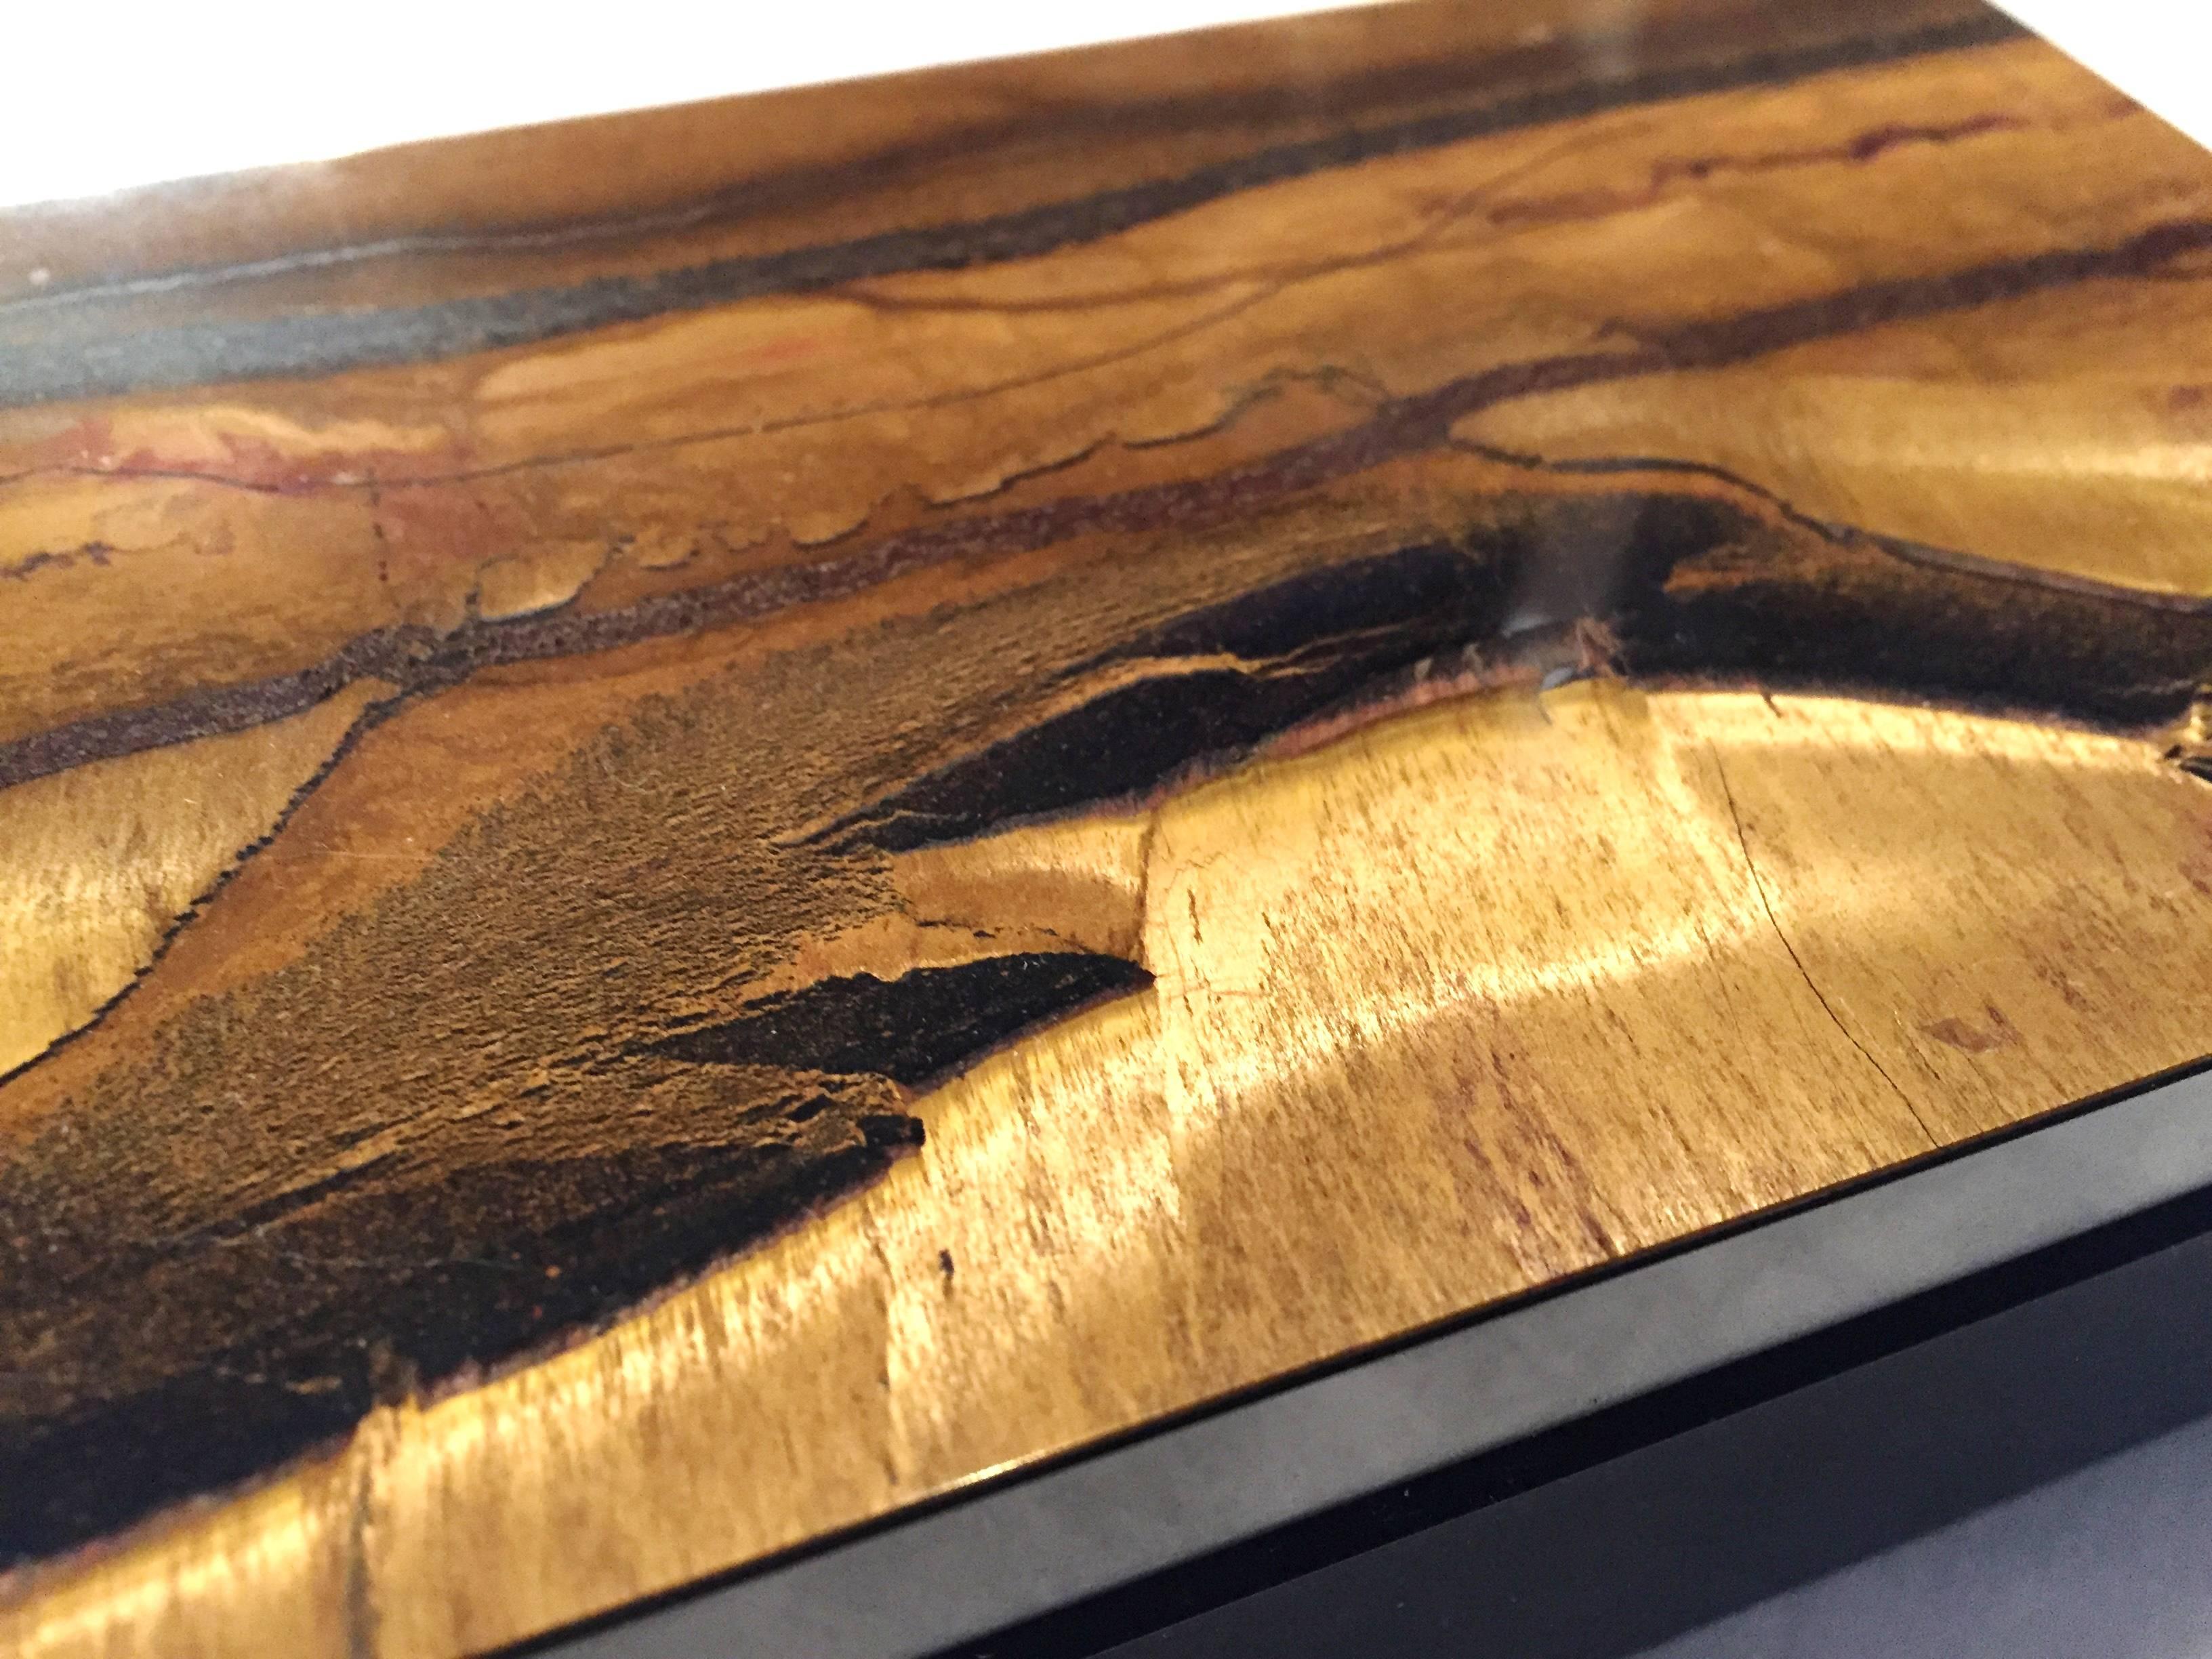 A stunning, completely handmade box made with brilliant Tiger Eye. The shimmering gem tone displays an intriguing picture of sand, sky, ocean, mountain, desert and caves. This is a very rare, highly valuable piece, as unlike most Tiger Eye boxes